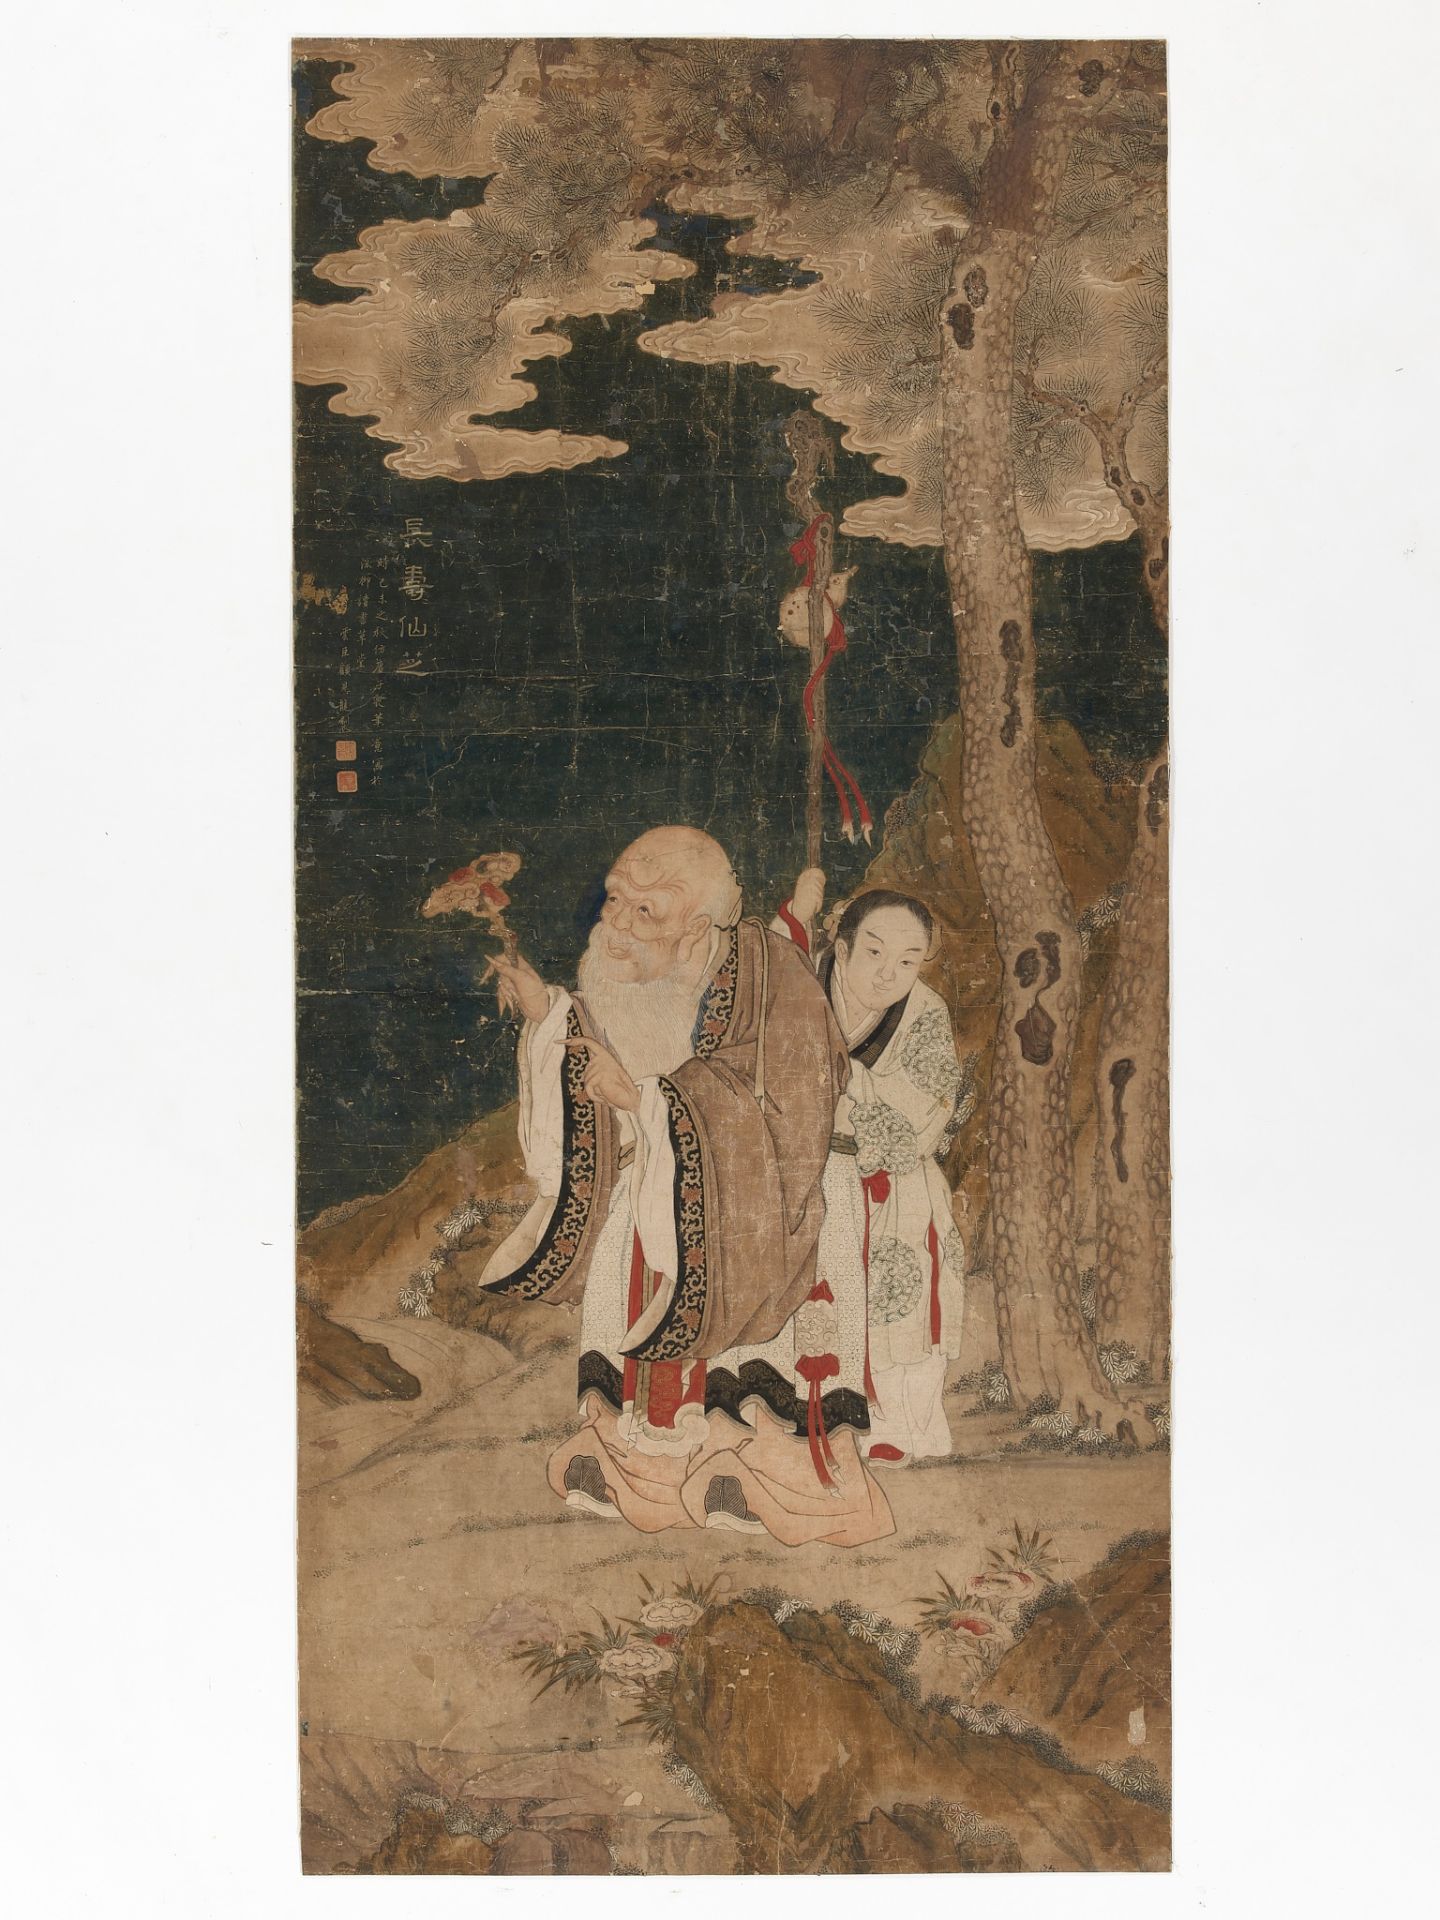 A LARGE PAINTING DEPICTING SHOULAO AND AN ATTENDANT, BY GU JIANLONG (1606-1687), DATED 1679 - Image 2 of 9